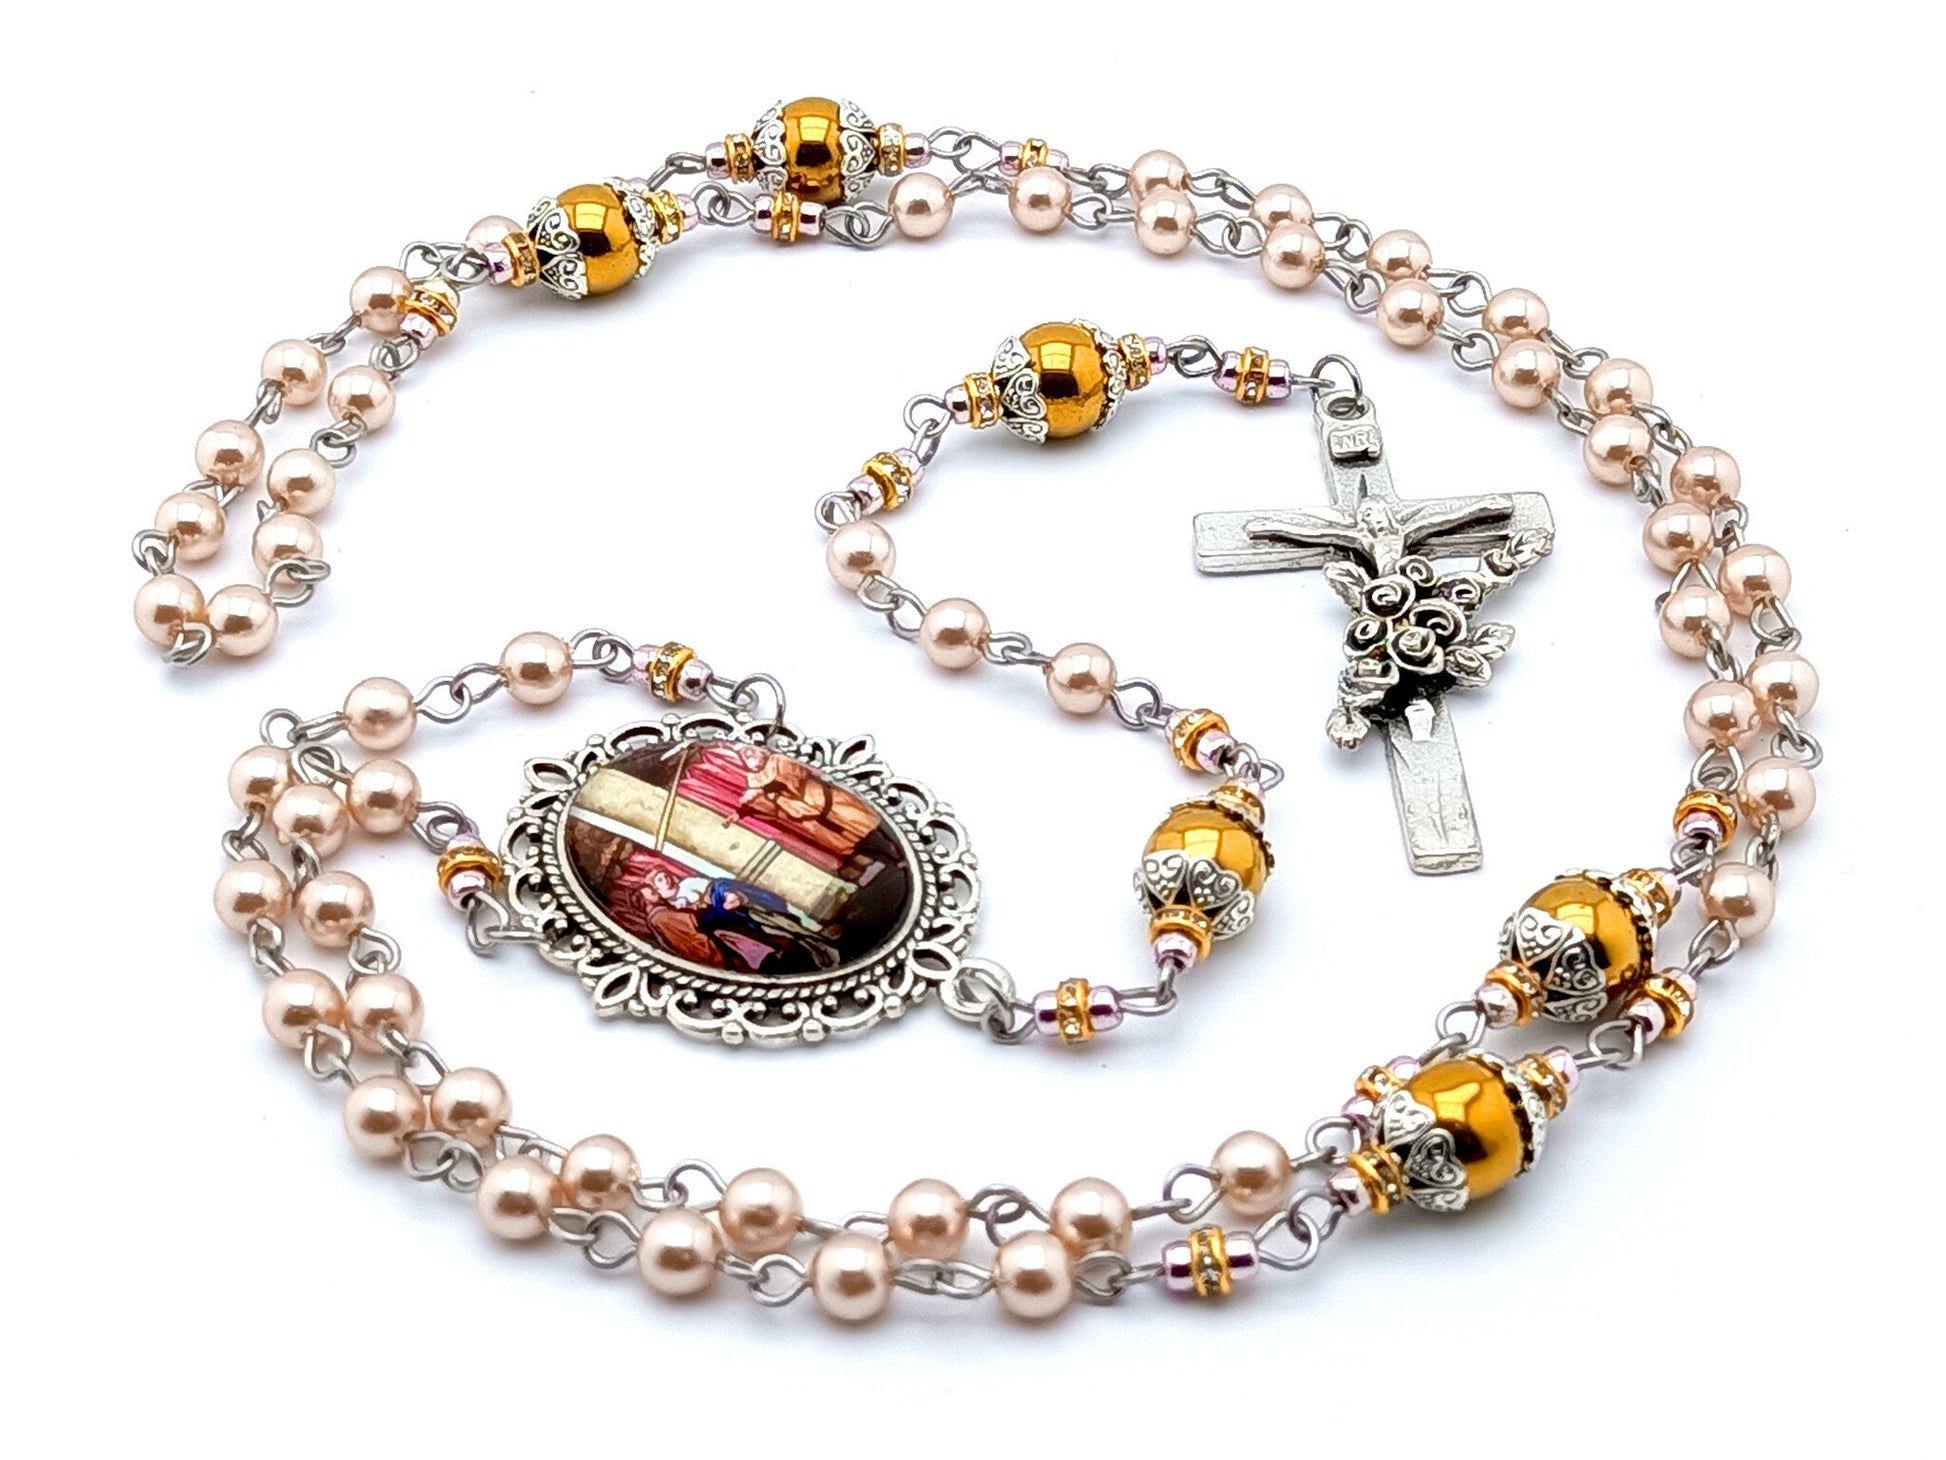 Saint Ann and Joachim unique rosary beads rosary with pink pearl and gold hematite gemstone beads, Saint Therese crucifix and picture centre medal.